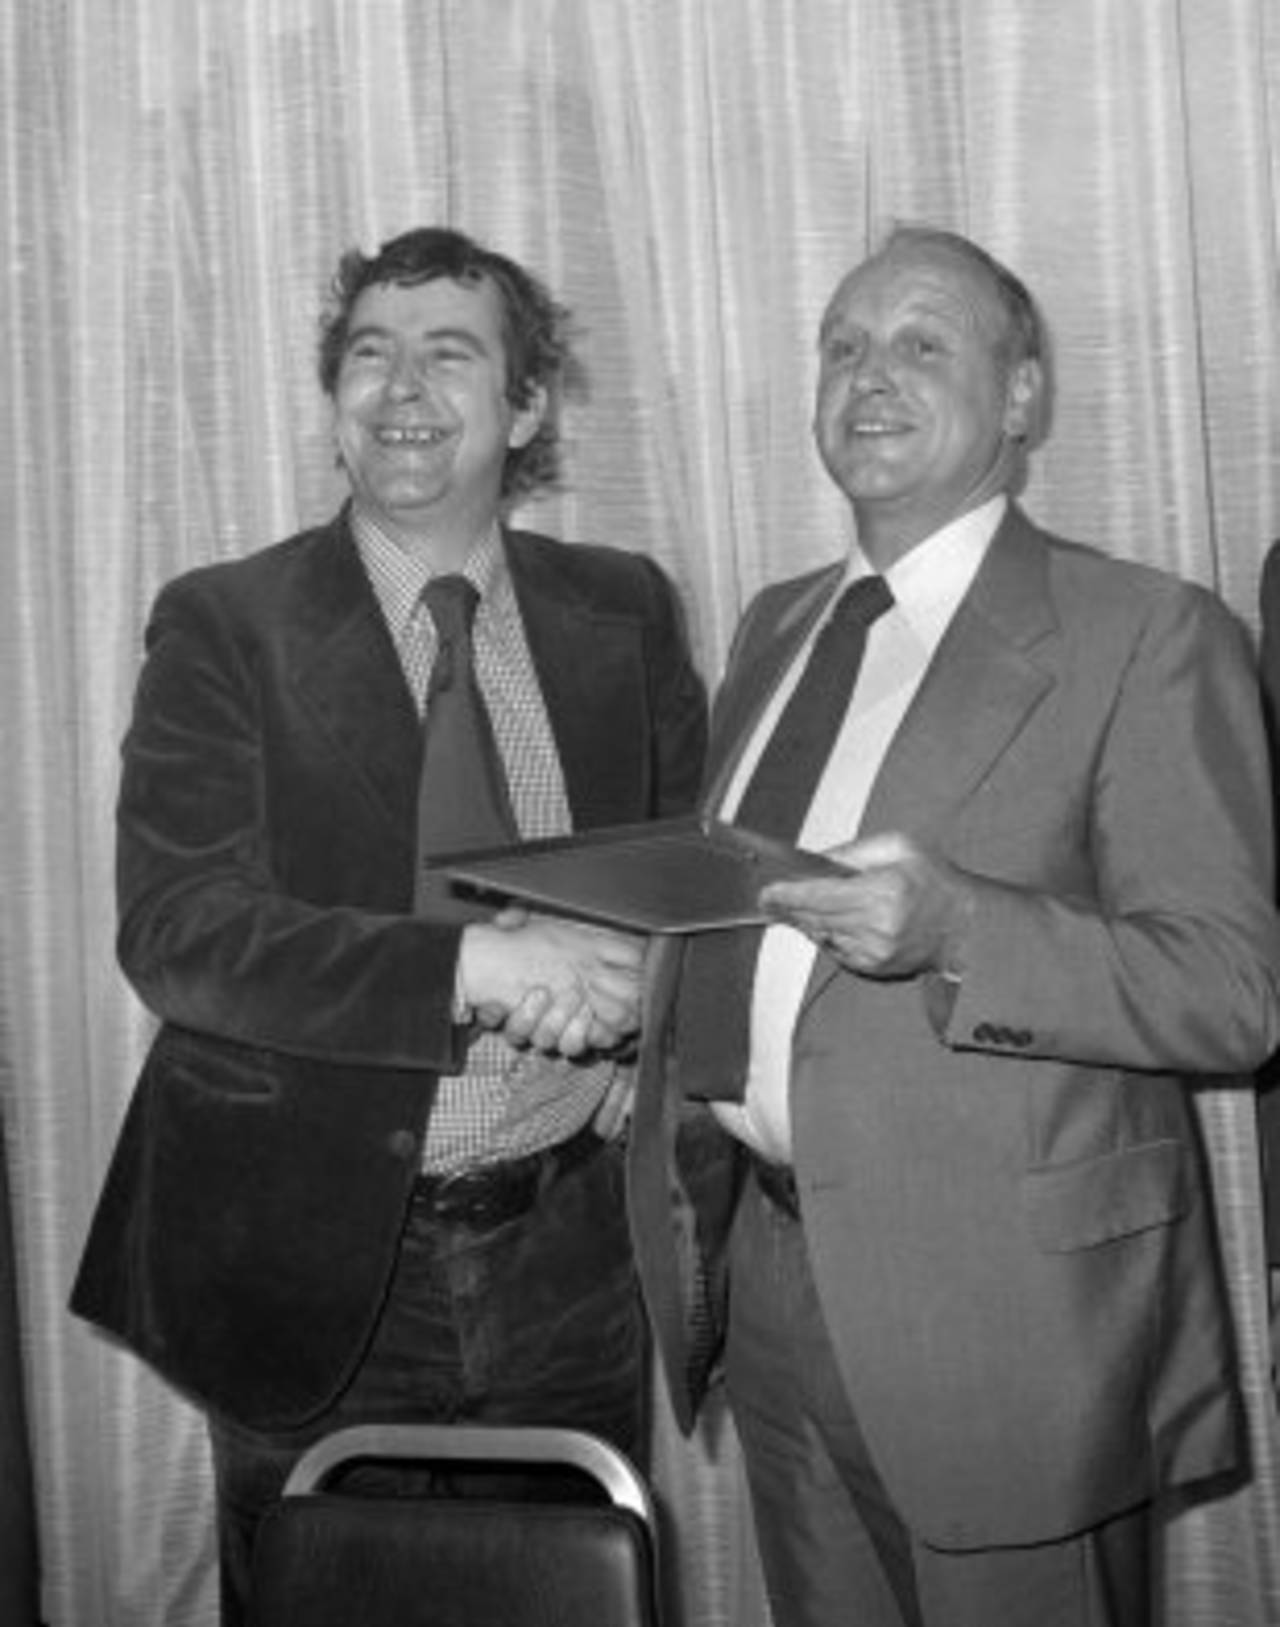 Frank Keating (l) of the <i>Guardian</i>, receiving his Best Sports Journalist for National Newspaper award from England football manager Ron Greenwood, Drury Lane Hotel, London, 1978